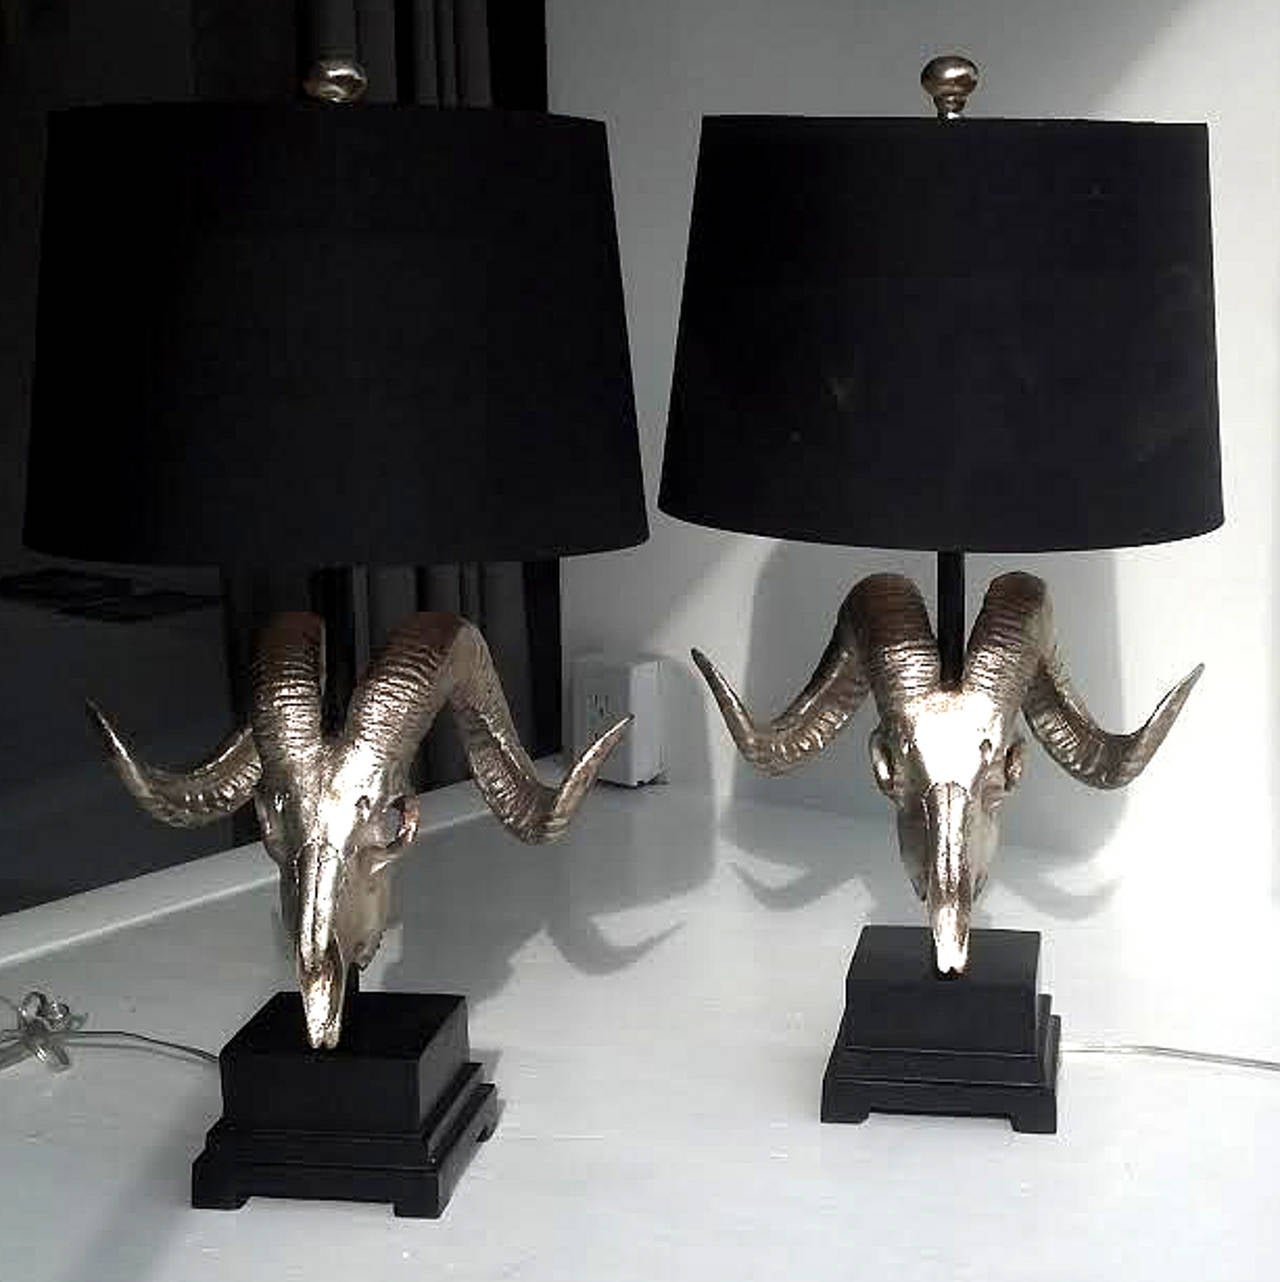 Pair of gilt ram skull form lamps. These are made from cast and gilded resin. They are very dramatic and very chic.
27inches tall overall, 14 inches to the top of the horns. The base is 6in. x6in. with the skull being 10inches deep and and 16